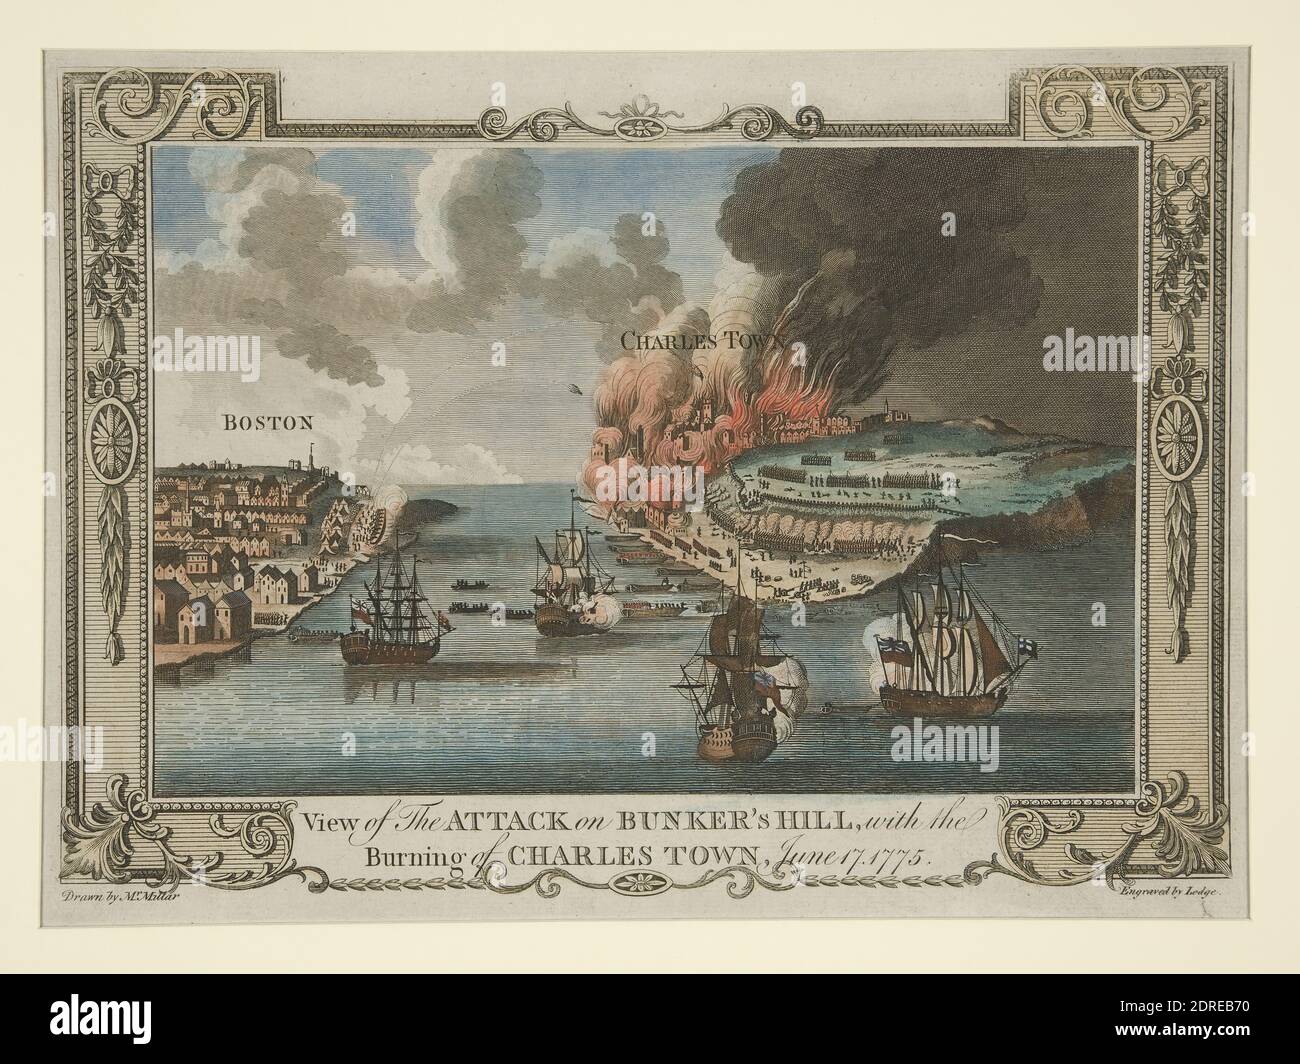 Engraver: John Lodge, British, active 1774–96, After: George Henry Millar, British, late 18th century, View of the attack on Bunker’s Hill, with the Burning of Charlestown, June 17, 1775, ca. 1783, Engraving by Lodge, Sheet: 22.8 × 31.5 cm (9 × 12 3/8 in.), Made in United States, Depicted Charlestown, Massachusetts, Depicted Boston, Massachusetts, American, 18th–19th century, Works on Paper - Prints Stock Photo